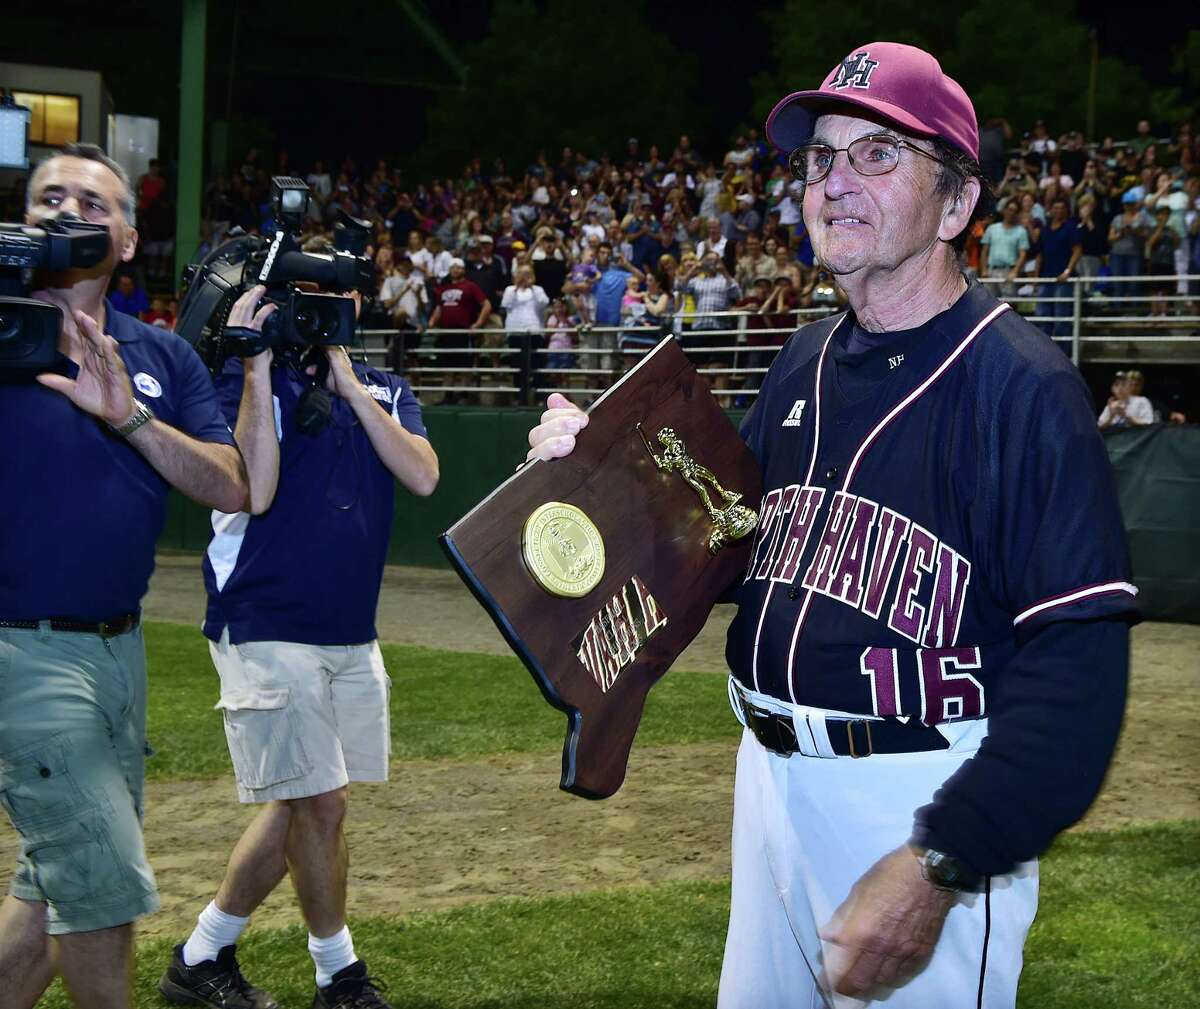 North Haven coach Bob DeMayo holds the 2015 Class L baseball championship trophy following the Indians’ 3-2 victory over East Lyme June 13, 2015 (Photo Catherine Avalone)